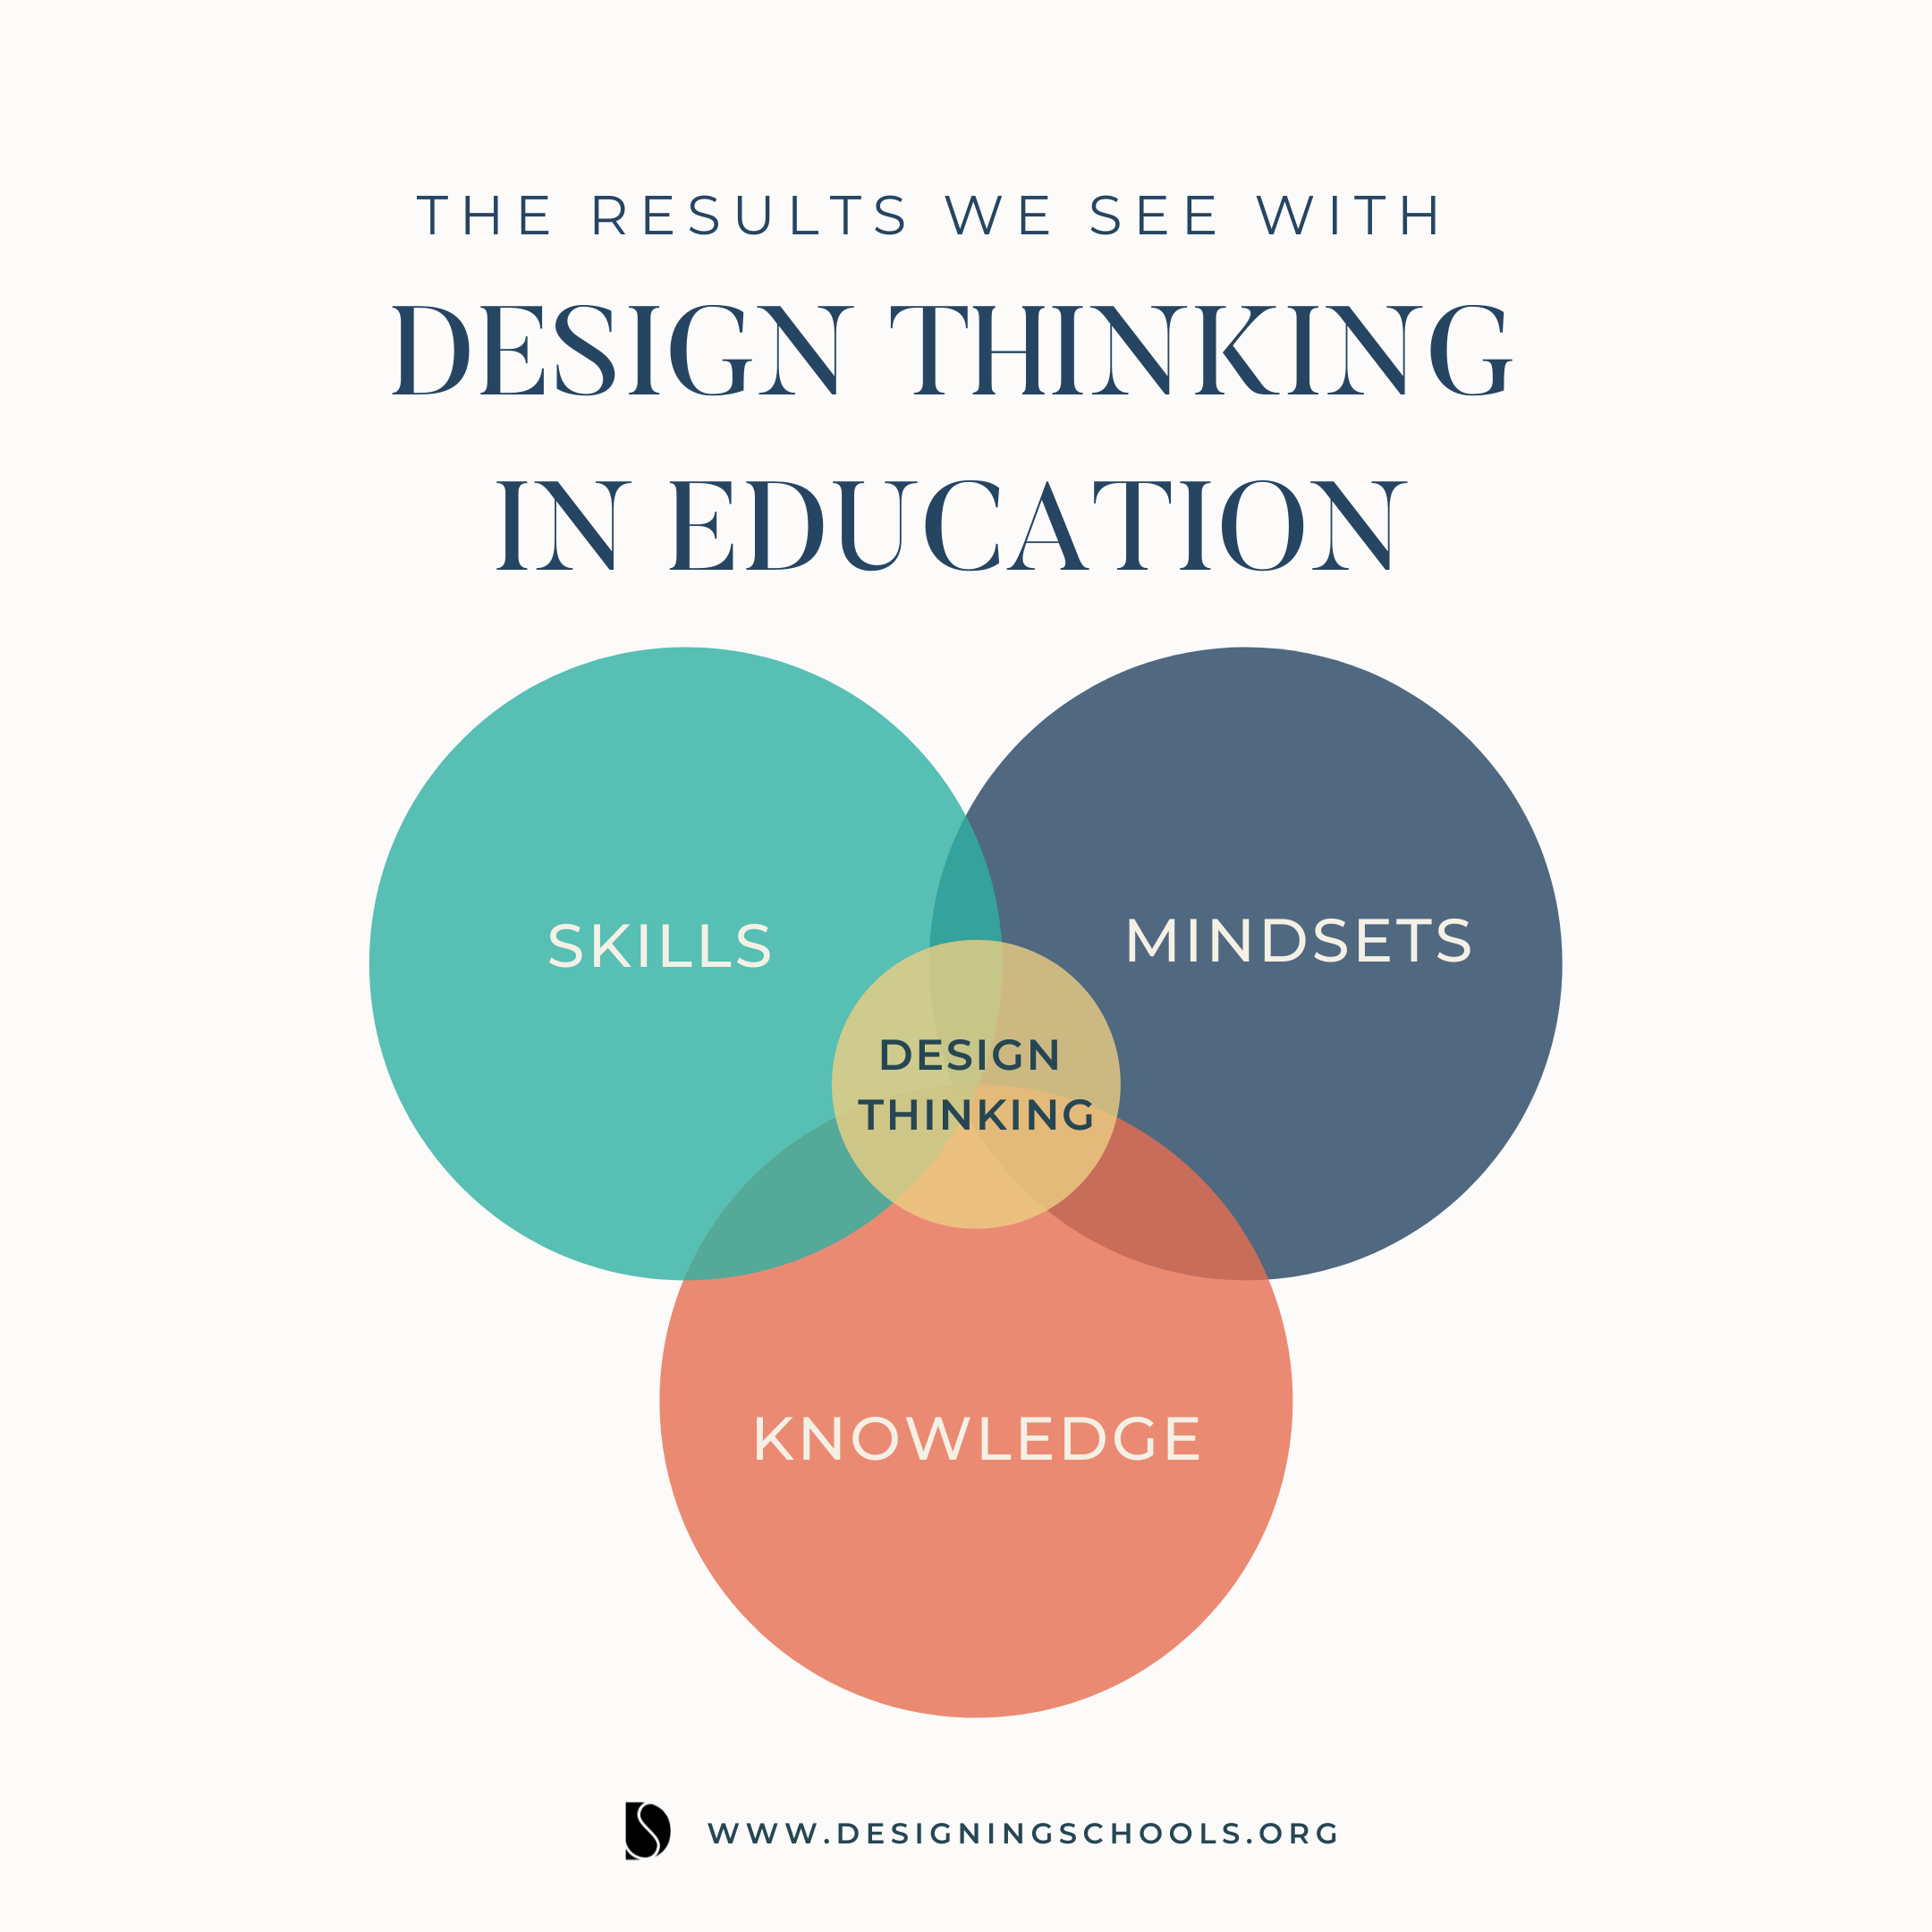 What is Design Thinking in Education